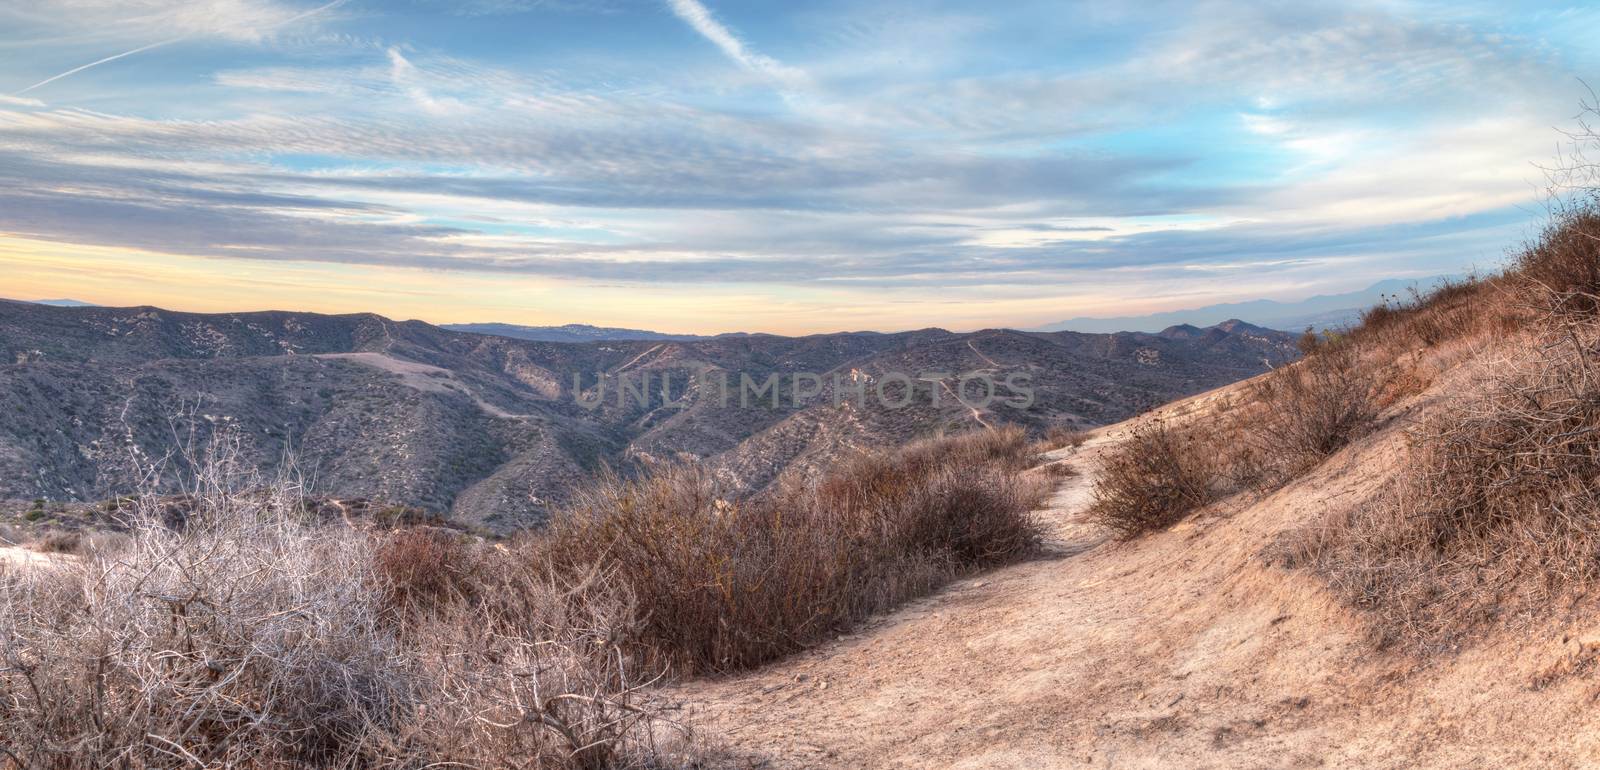 Top of the World hiking trail dirt road in the wilderness of Laguna Beach, California at sunset